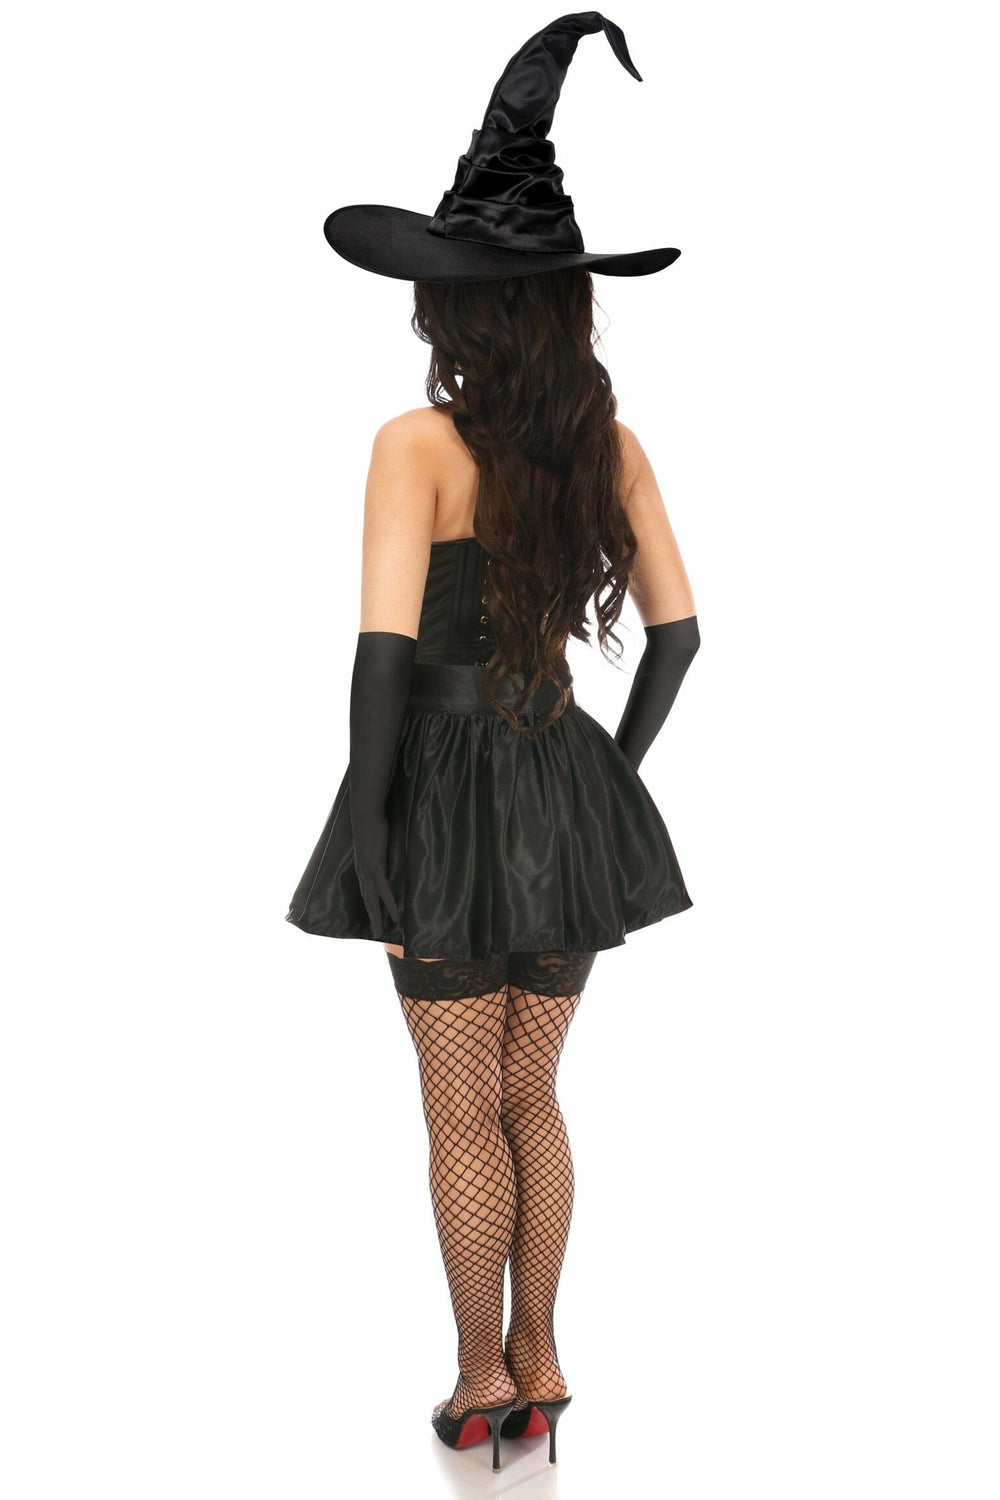 Lavish 4 PC Black Lace Witch Corset Costume-Witch Costumes-Daisy Corsets-SEXYSHOES.COM